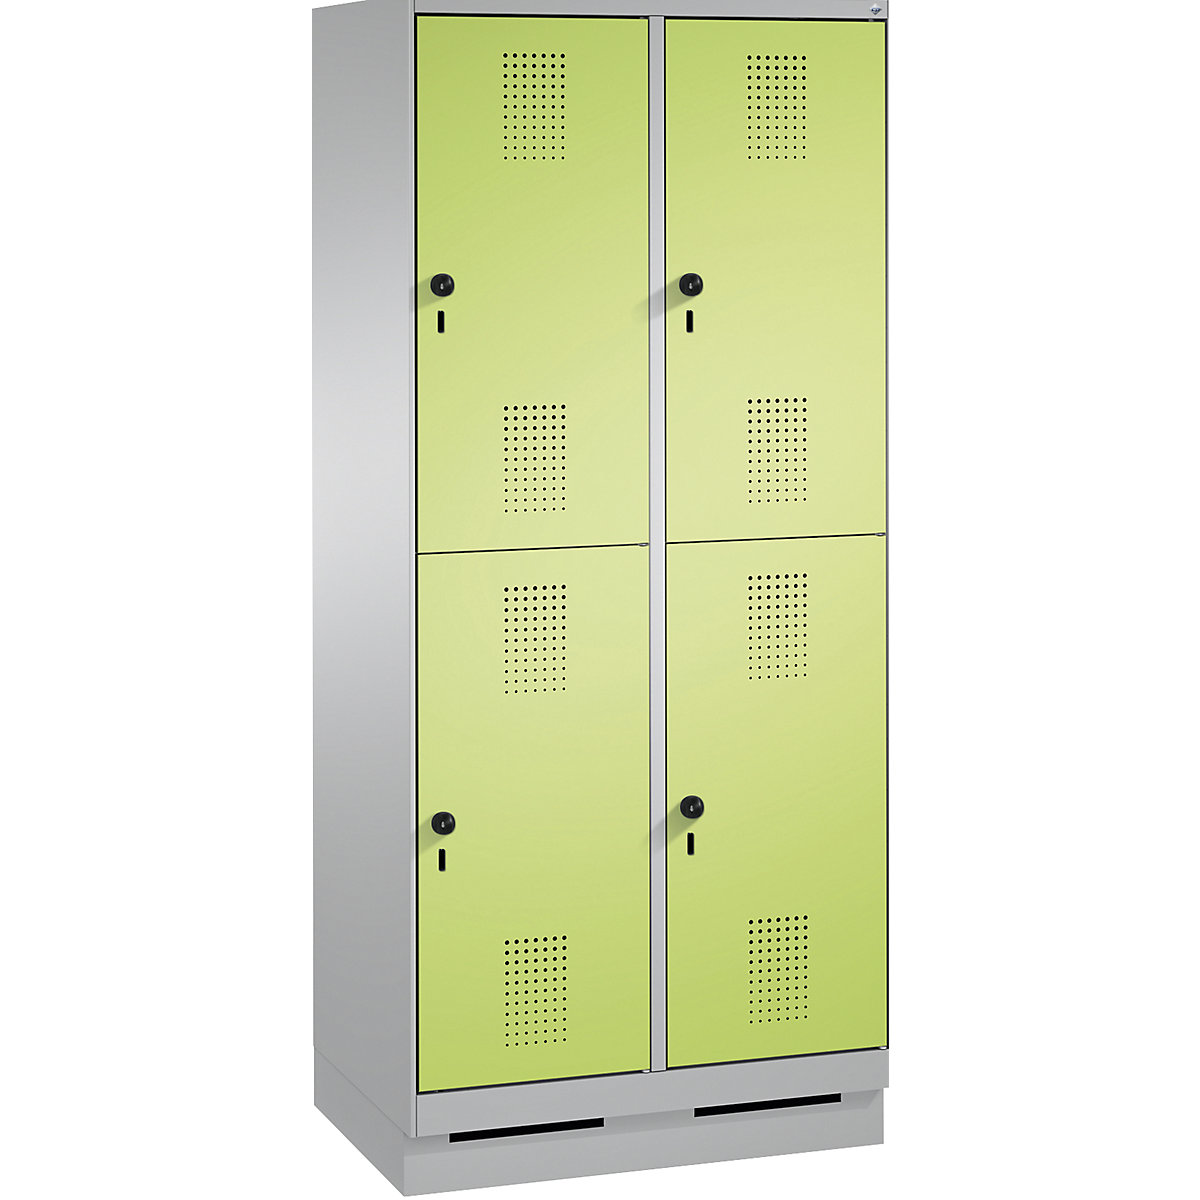 EVOLO cloakroom locker, double tier, with plinth – C+P, 2 compartments, 2 shelf compartments each, compartment width 400 mm, white aluminium / viridian green-14